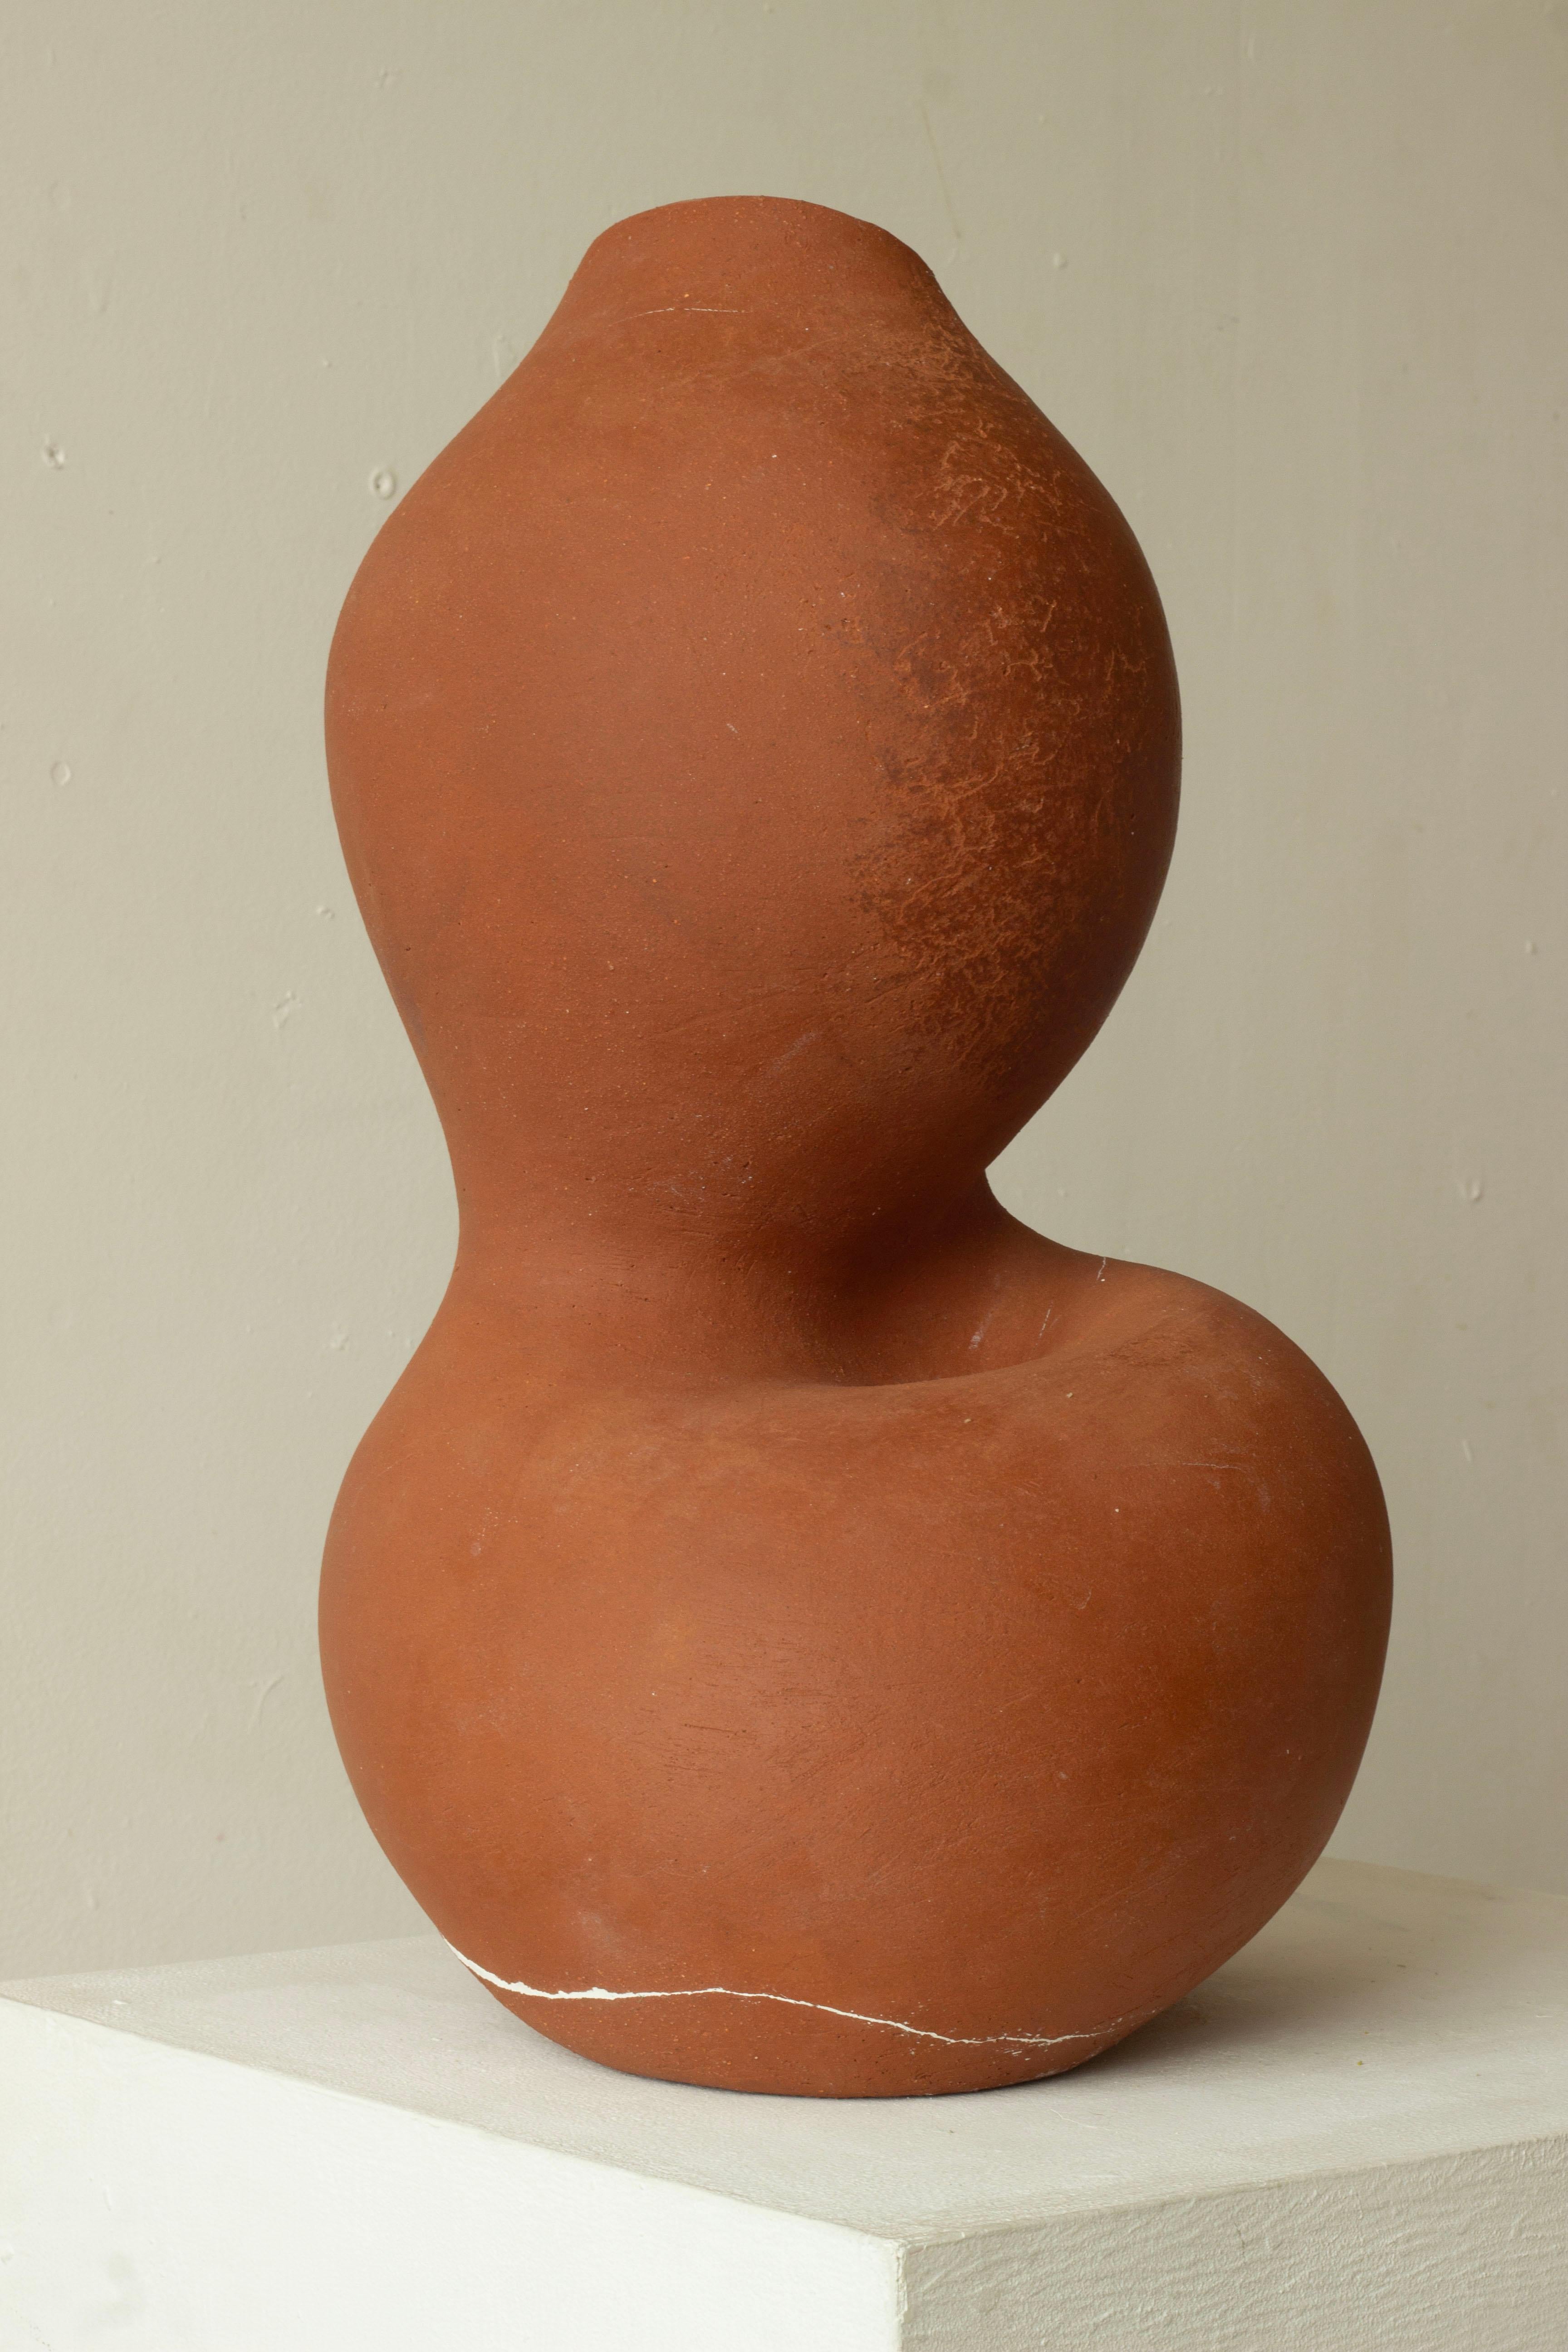 Woman Cracked But Healed 204 Vase by Karina Smagulova
One of a Kind.
Dimensions: Ø 35 x H 50 cm.
Materials: Terracotta and epoxy.
​
With an Armenian and Kazakhstan heritage, Karina Smagulova was born in Greece in 1995 and graduated with a diploma in